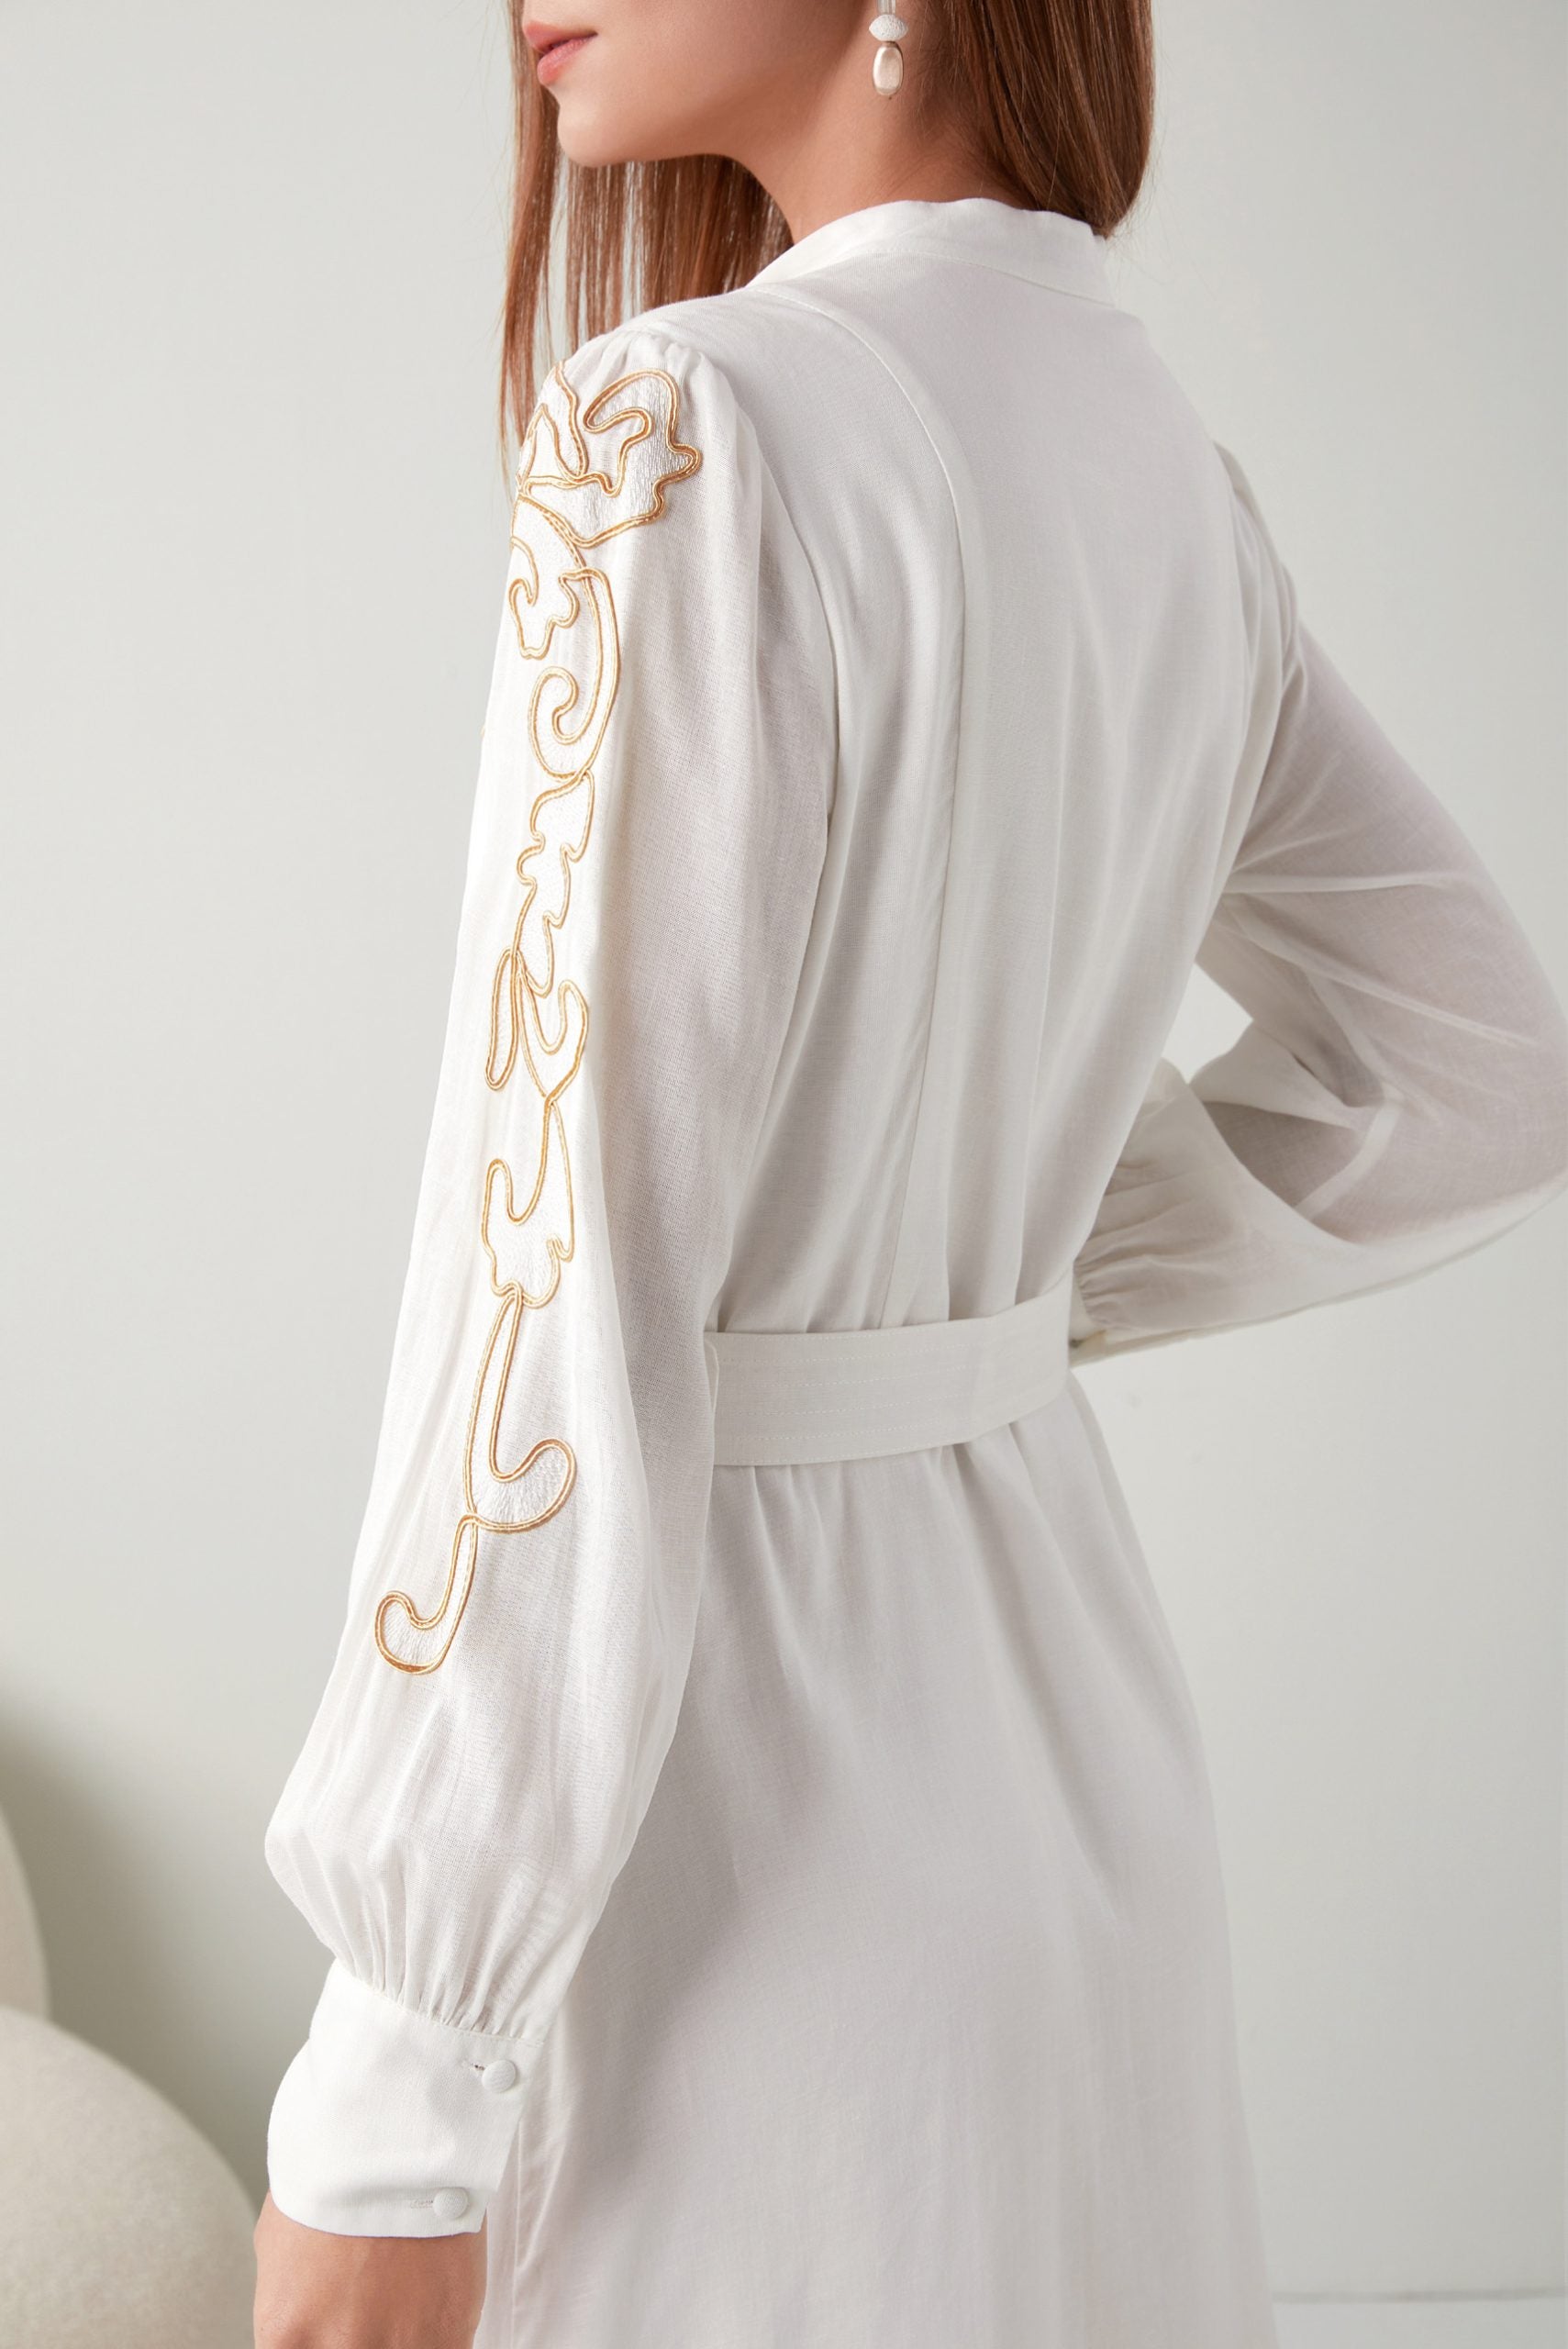 "Chic meets charm: Embroidered short white dress. Discover your perfect summer look!"